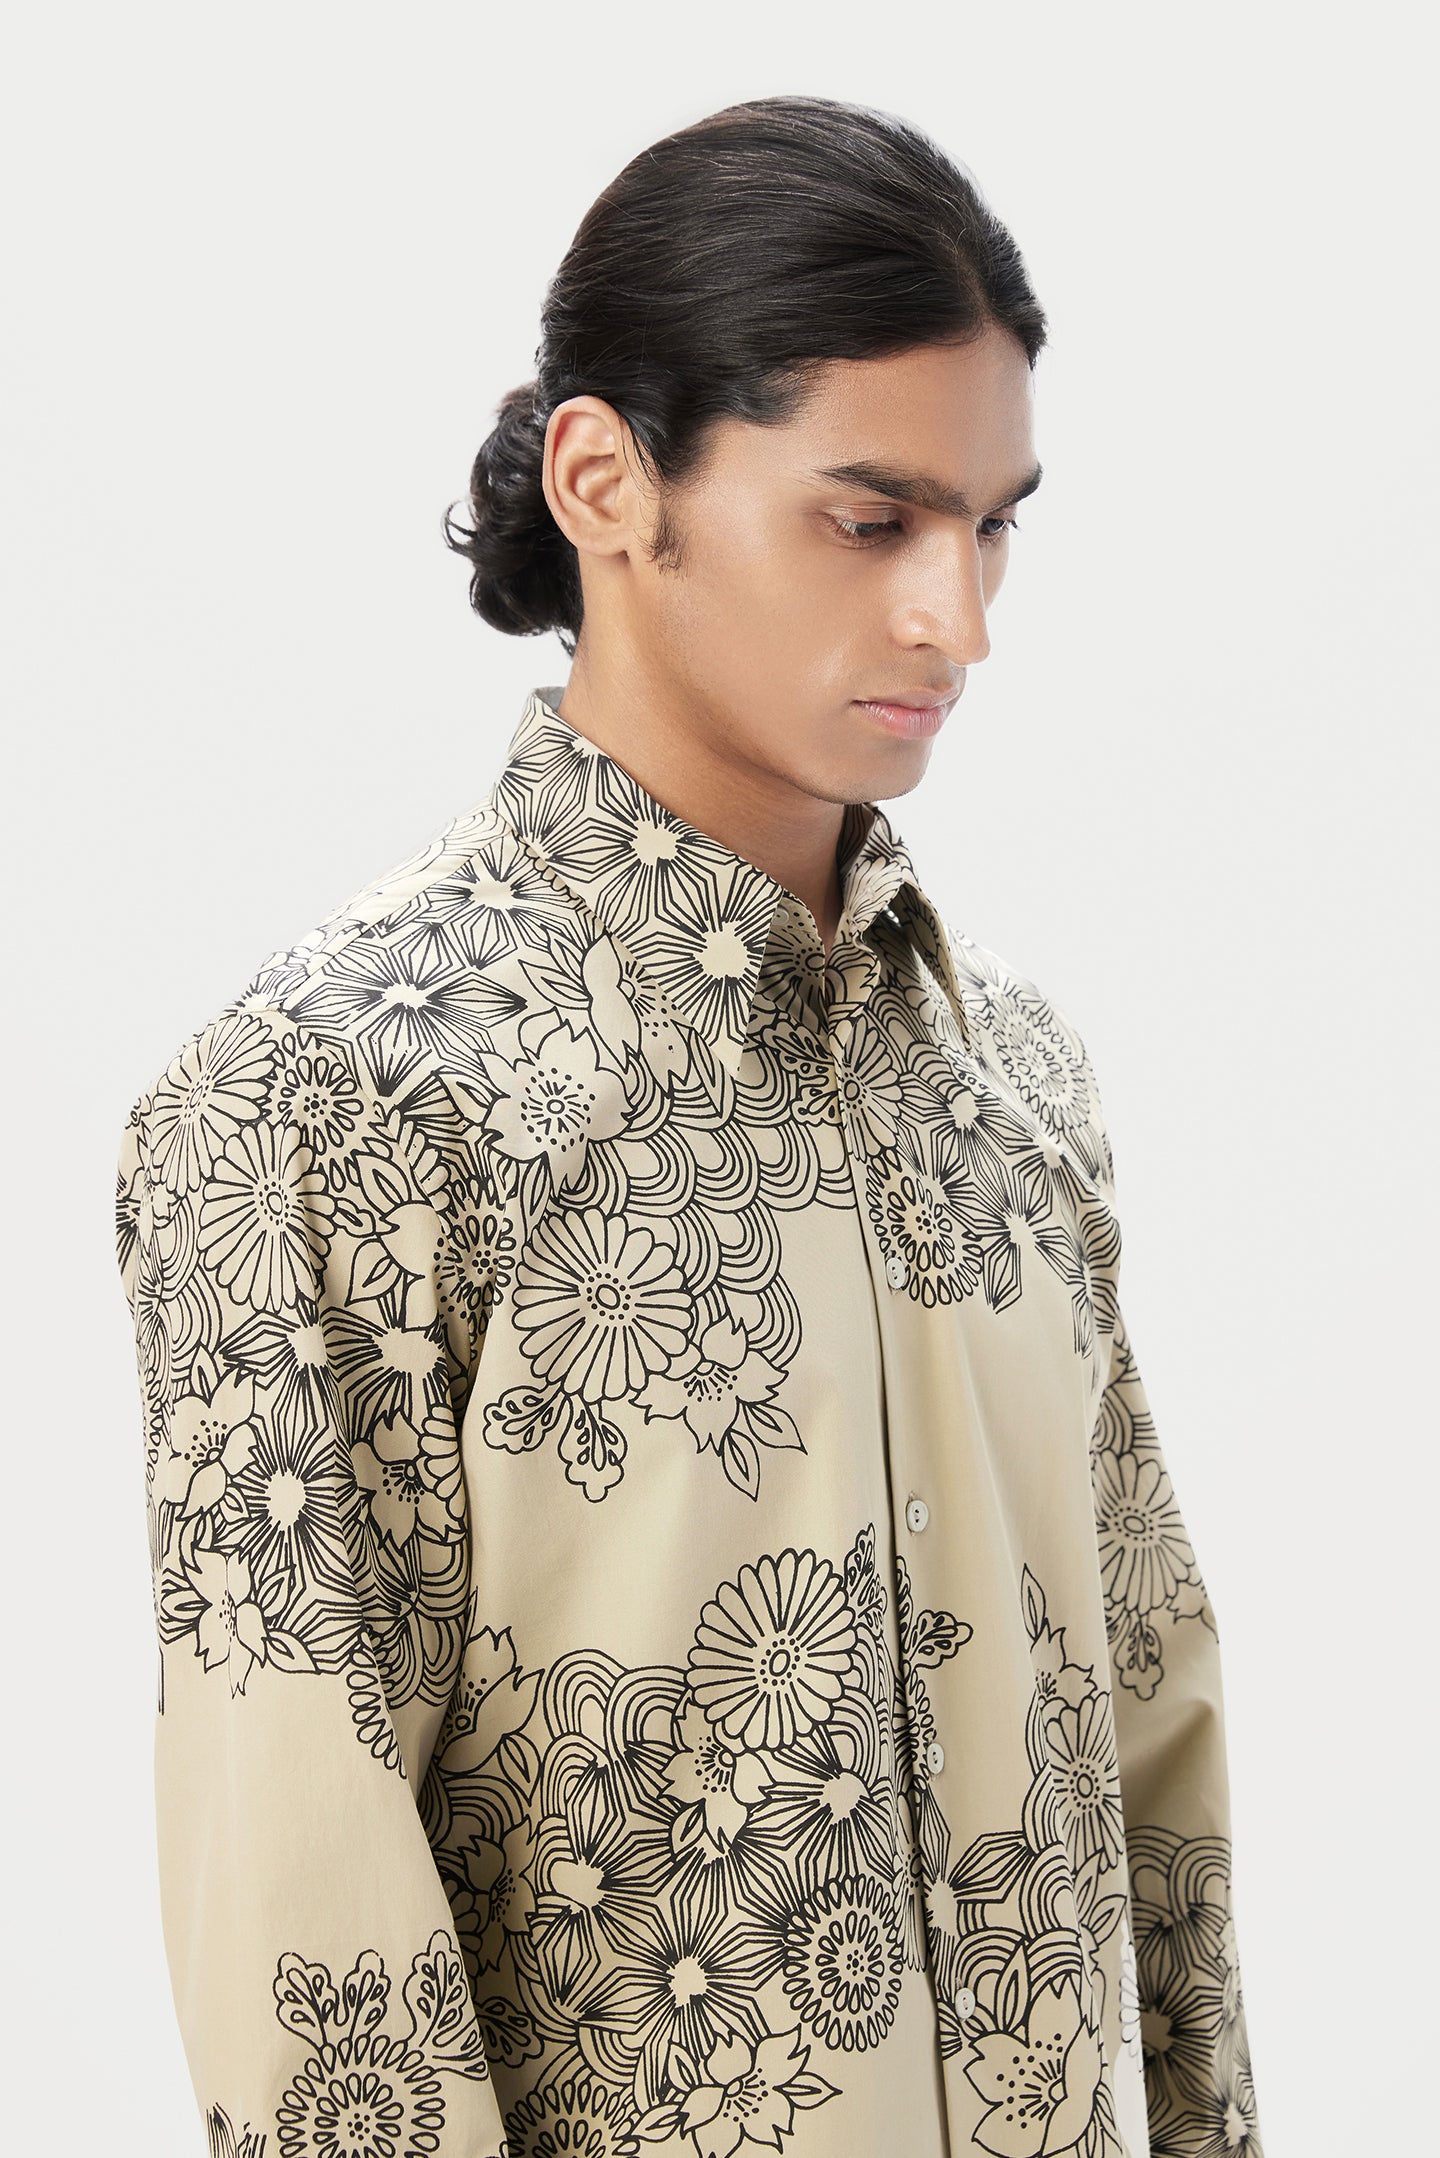 Regular Fit Button-Down Shirt with All-Over Floral Print